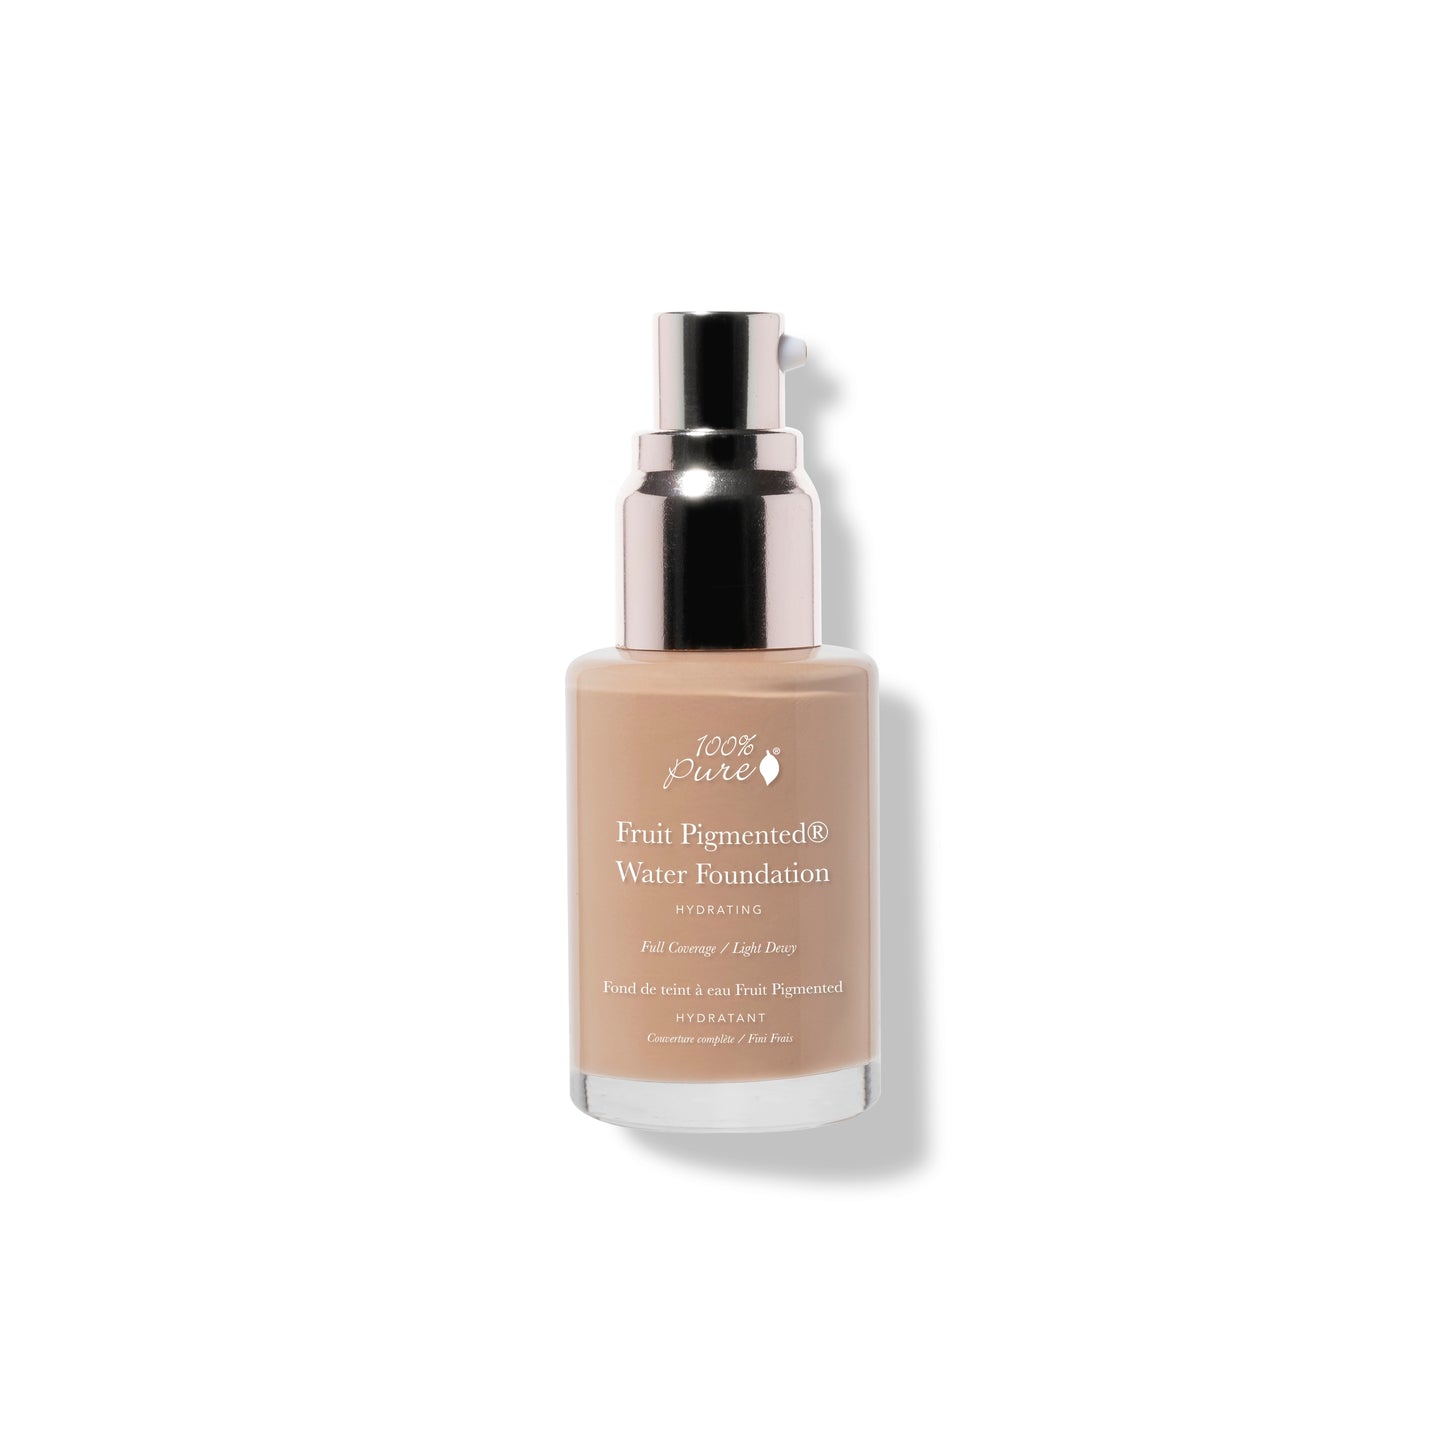 100% PURE Fruit Pigmented Full Coverage Water Foundation olive 3.0